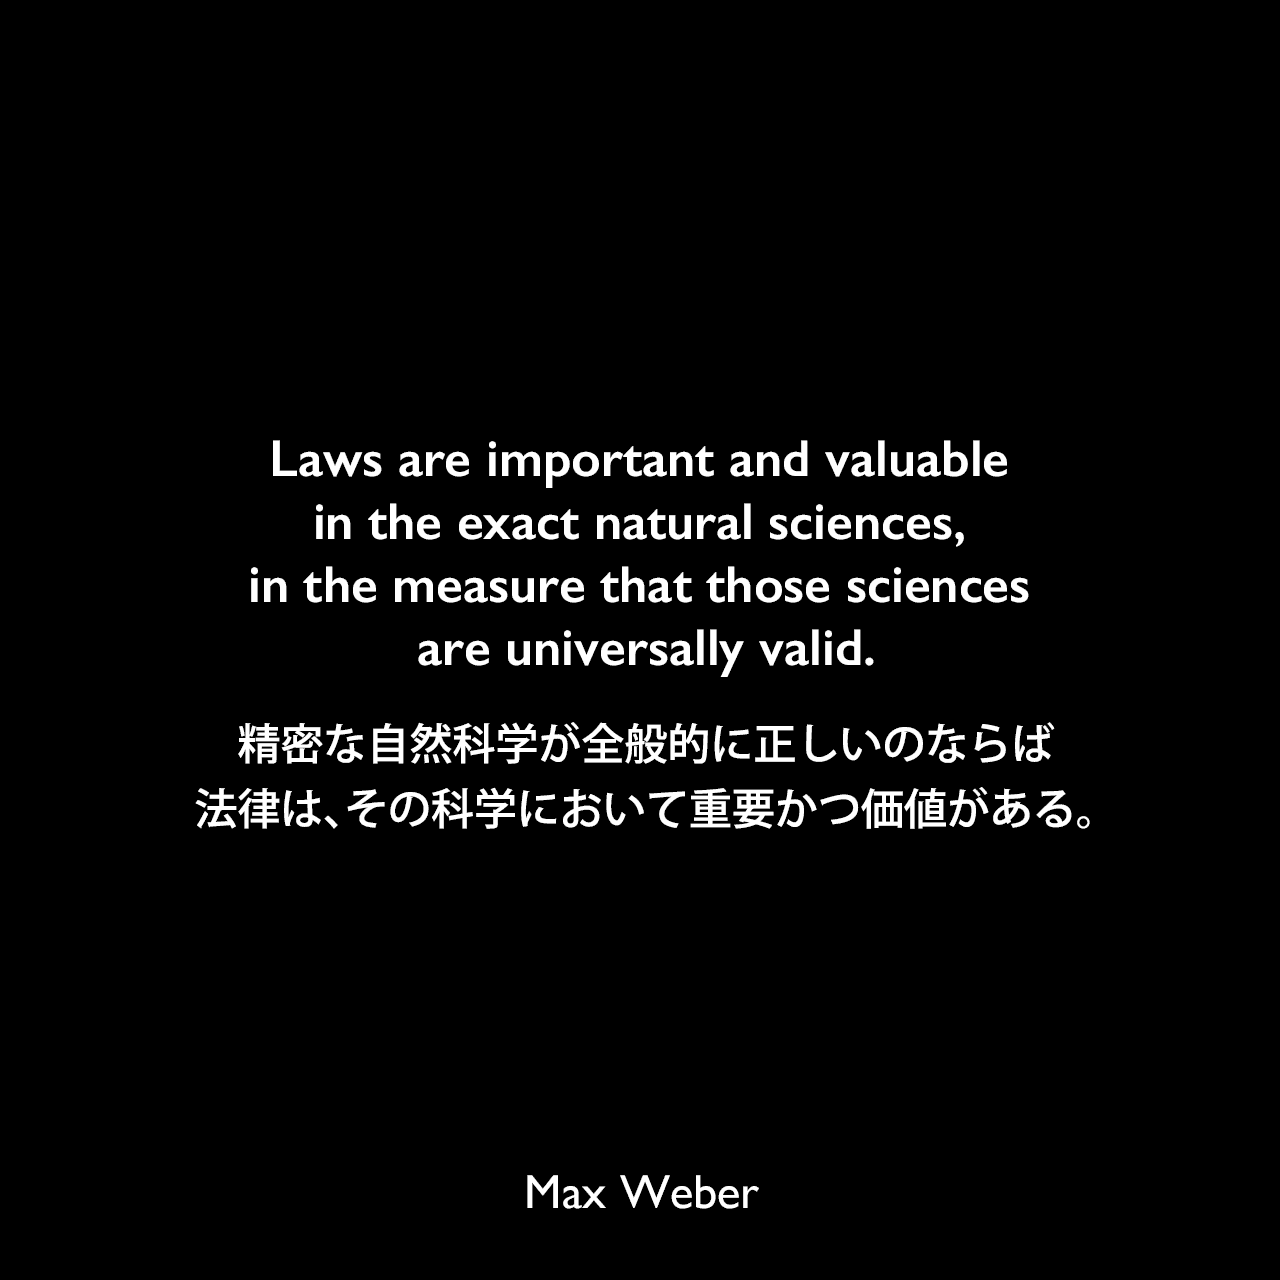 Laws are important and valuable in the exact natural sciences, in the measure that those sciences are universally valid.精密な自然科学が全般的に正しいのならば、法律は、その科学において重要かつ価値がある。Max Weber